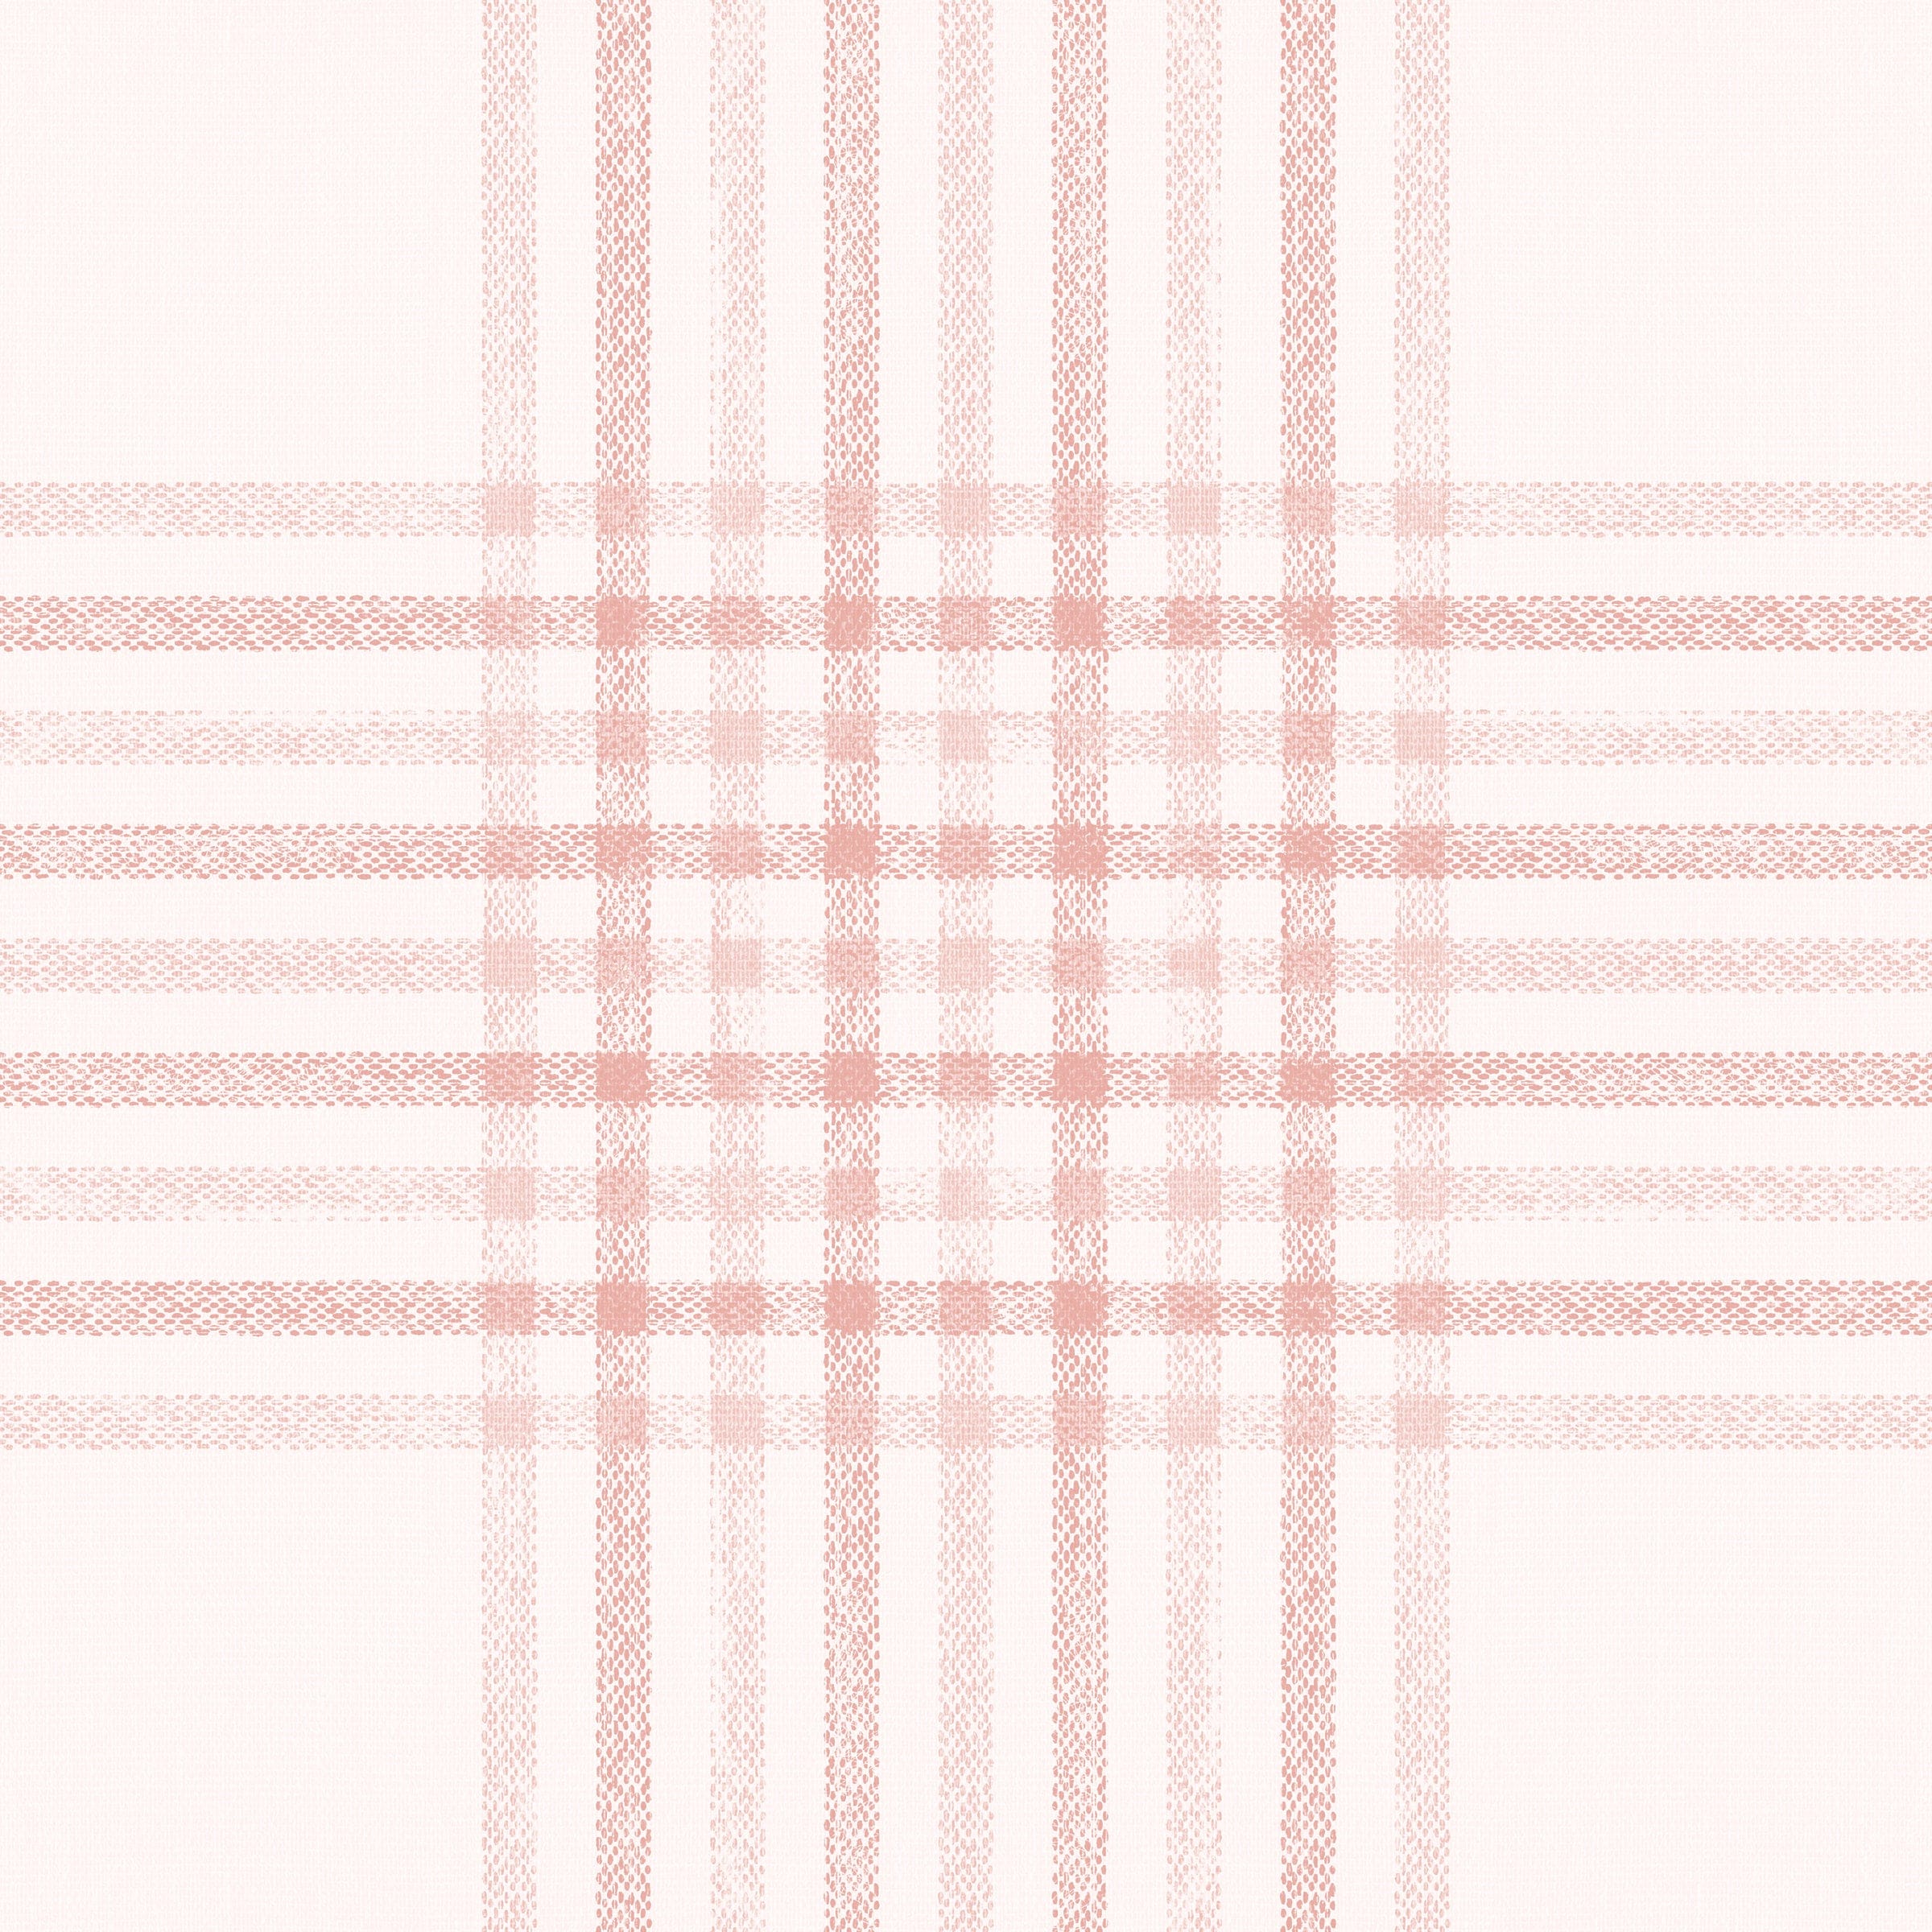 A close-up view of pink plaid wallpaper showcasing a delicate checkered pattern in soft pink hues. The design features intersecting lines that create a classic plaid look, perfect for adding a touch of warmth and charm to any room.